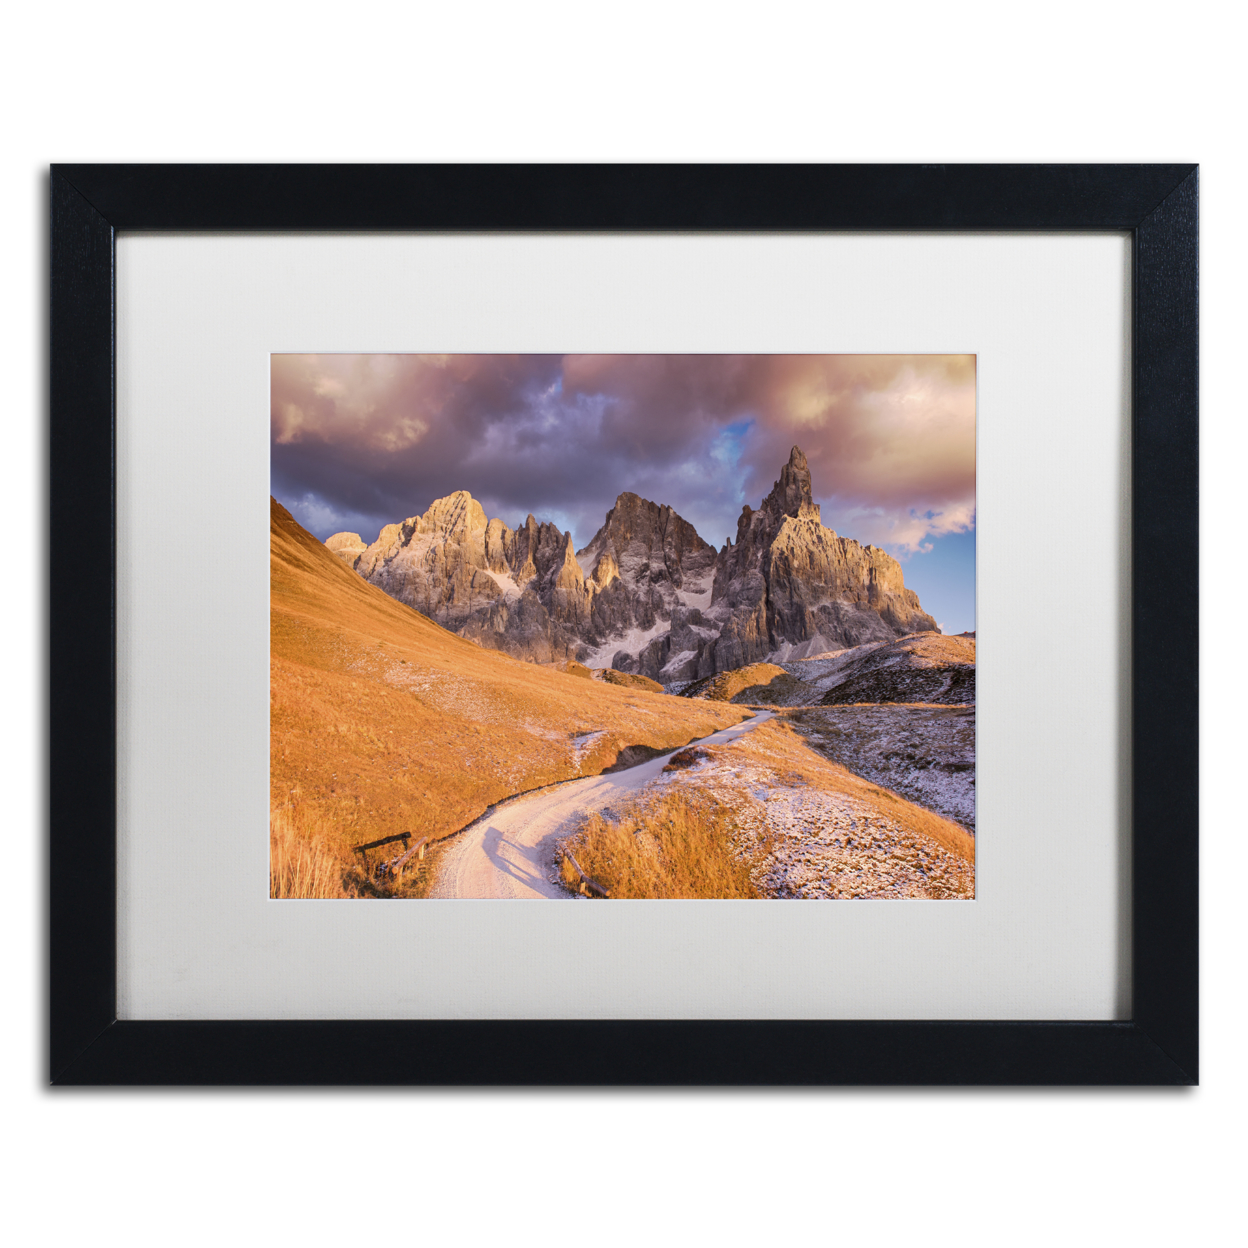 Michael Blanchette Photography 'Pale Di San Martino' Black Wooden Framed Art 18 X 22 Inches